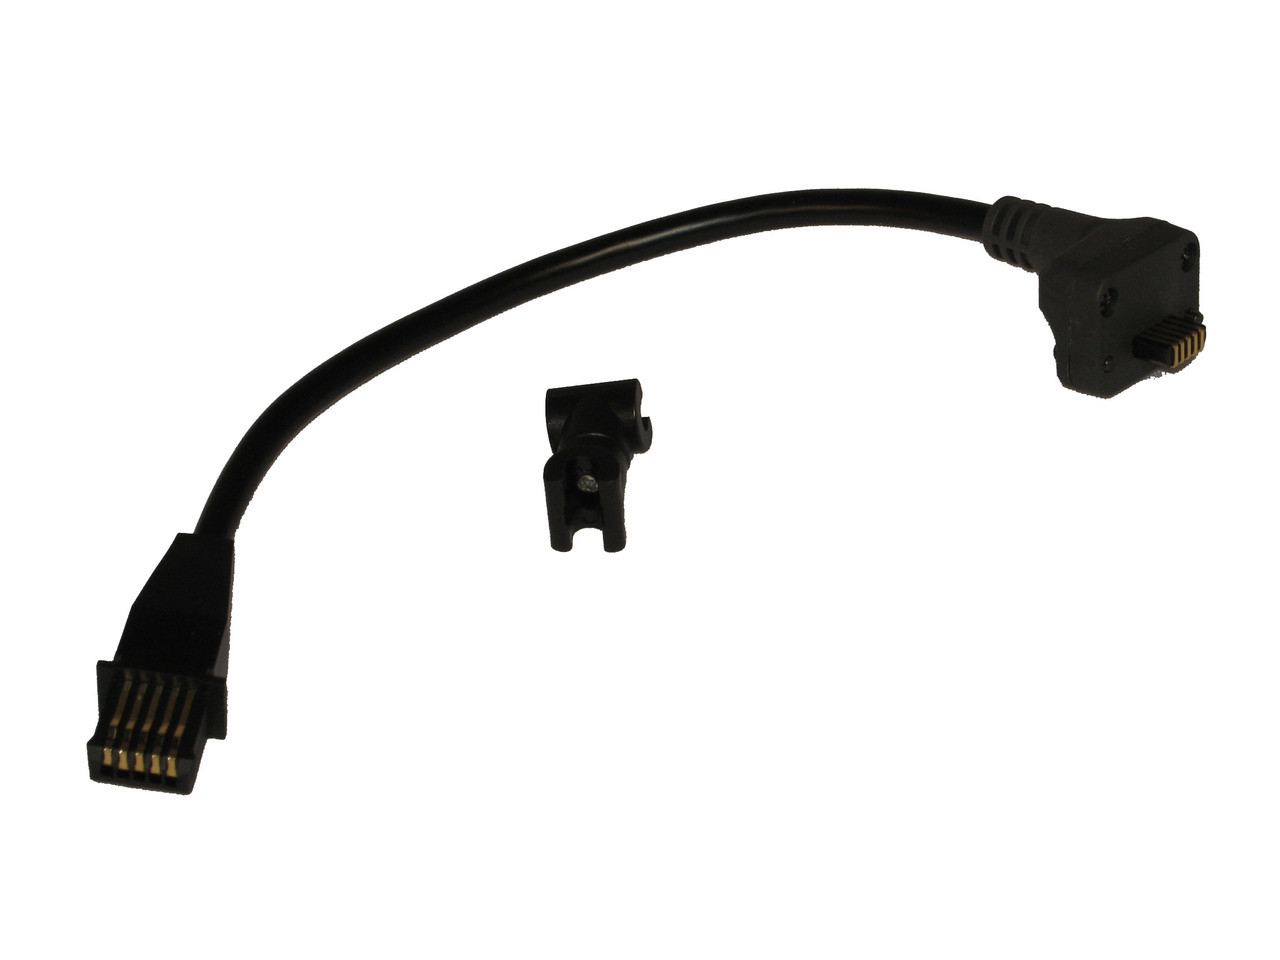 ASDQMS Wireless Gage Cable 02AZD790F for Mitutoyo Caliper, with straight plain connector